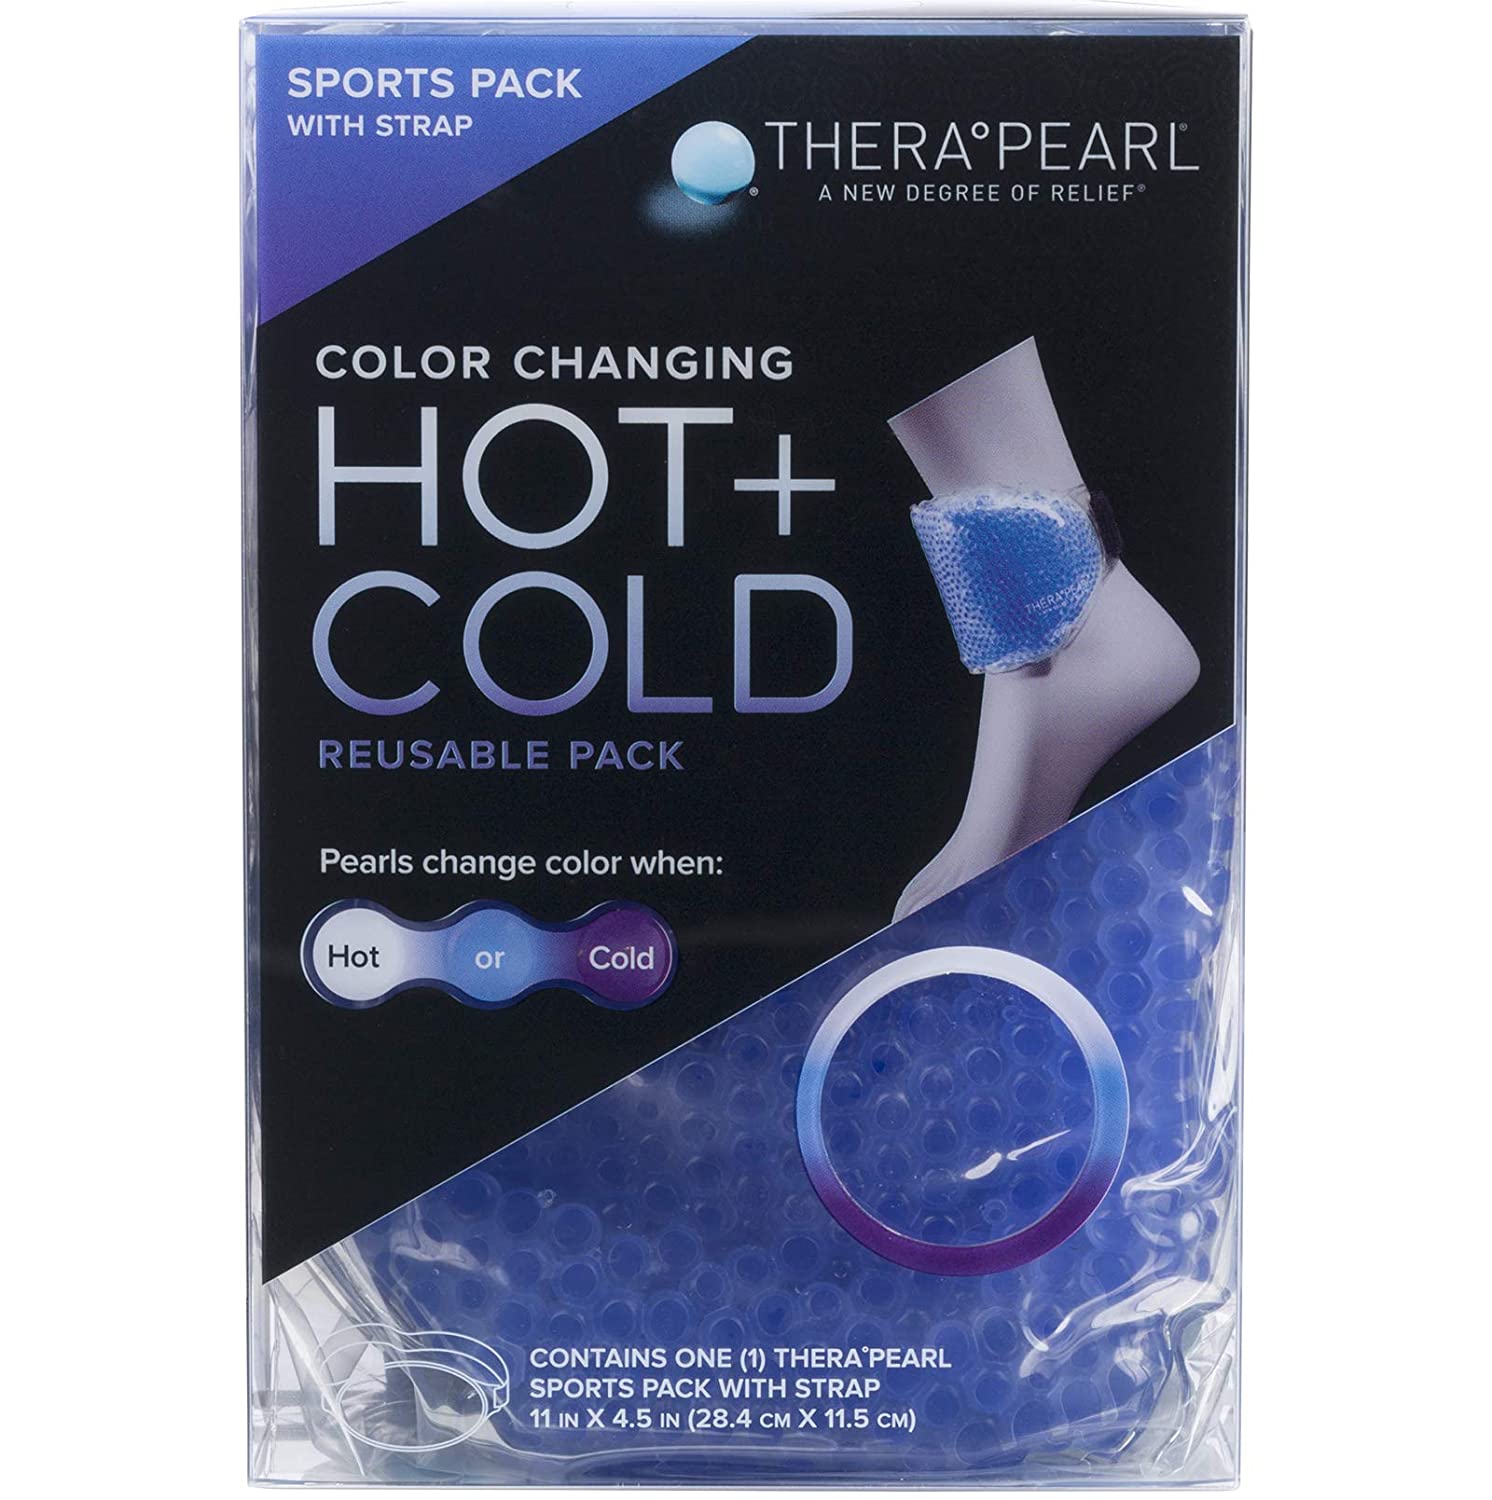 TheraPearl Color Changing Hot + Cold Reusabke Pack